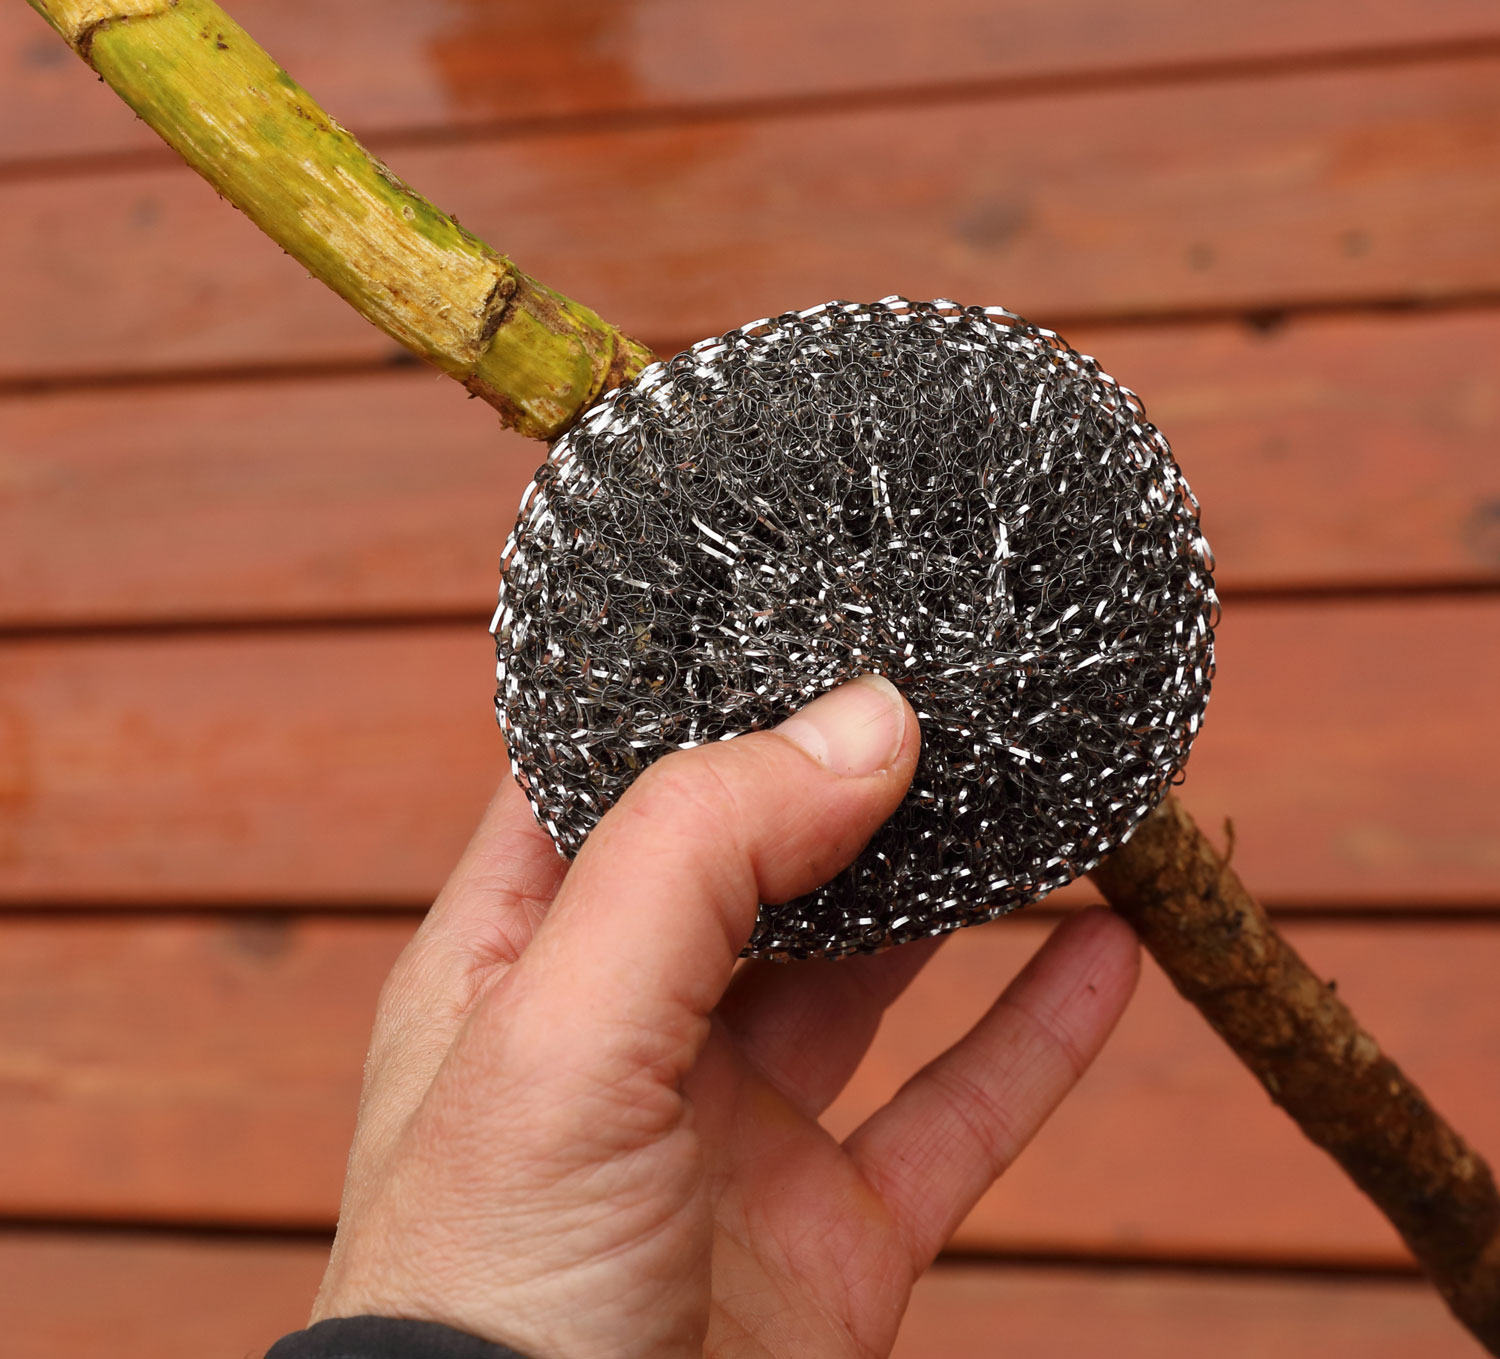 A stainless steel scrubber works well to take the brown, outer bark off.